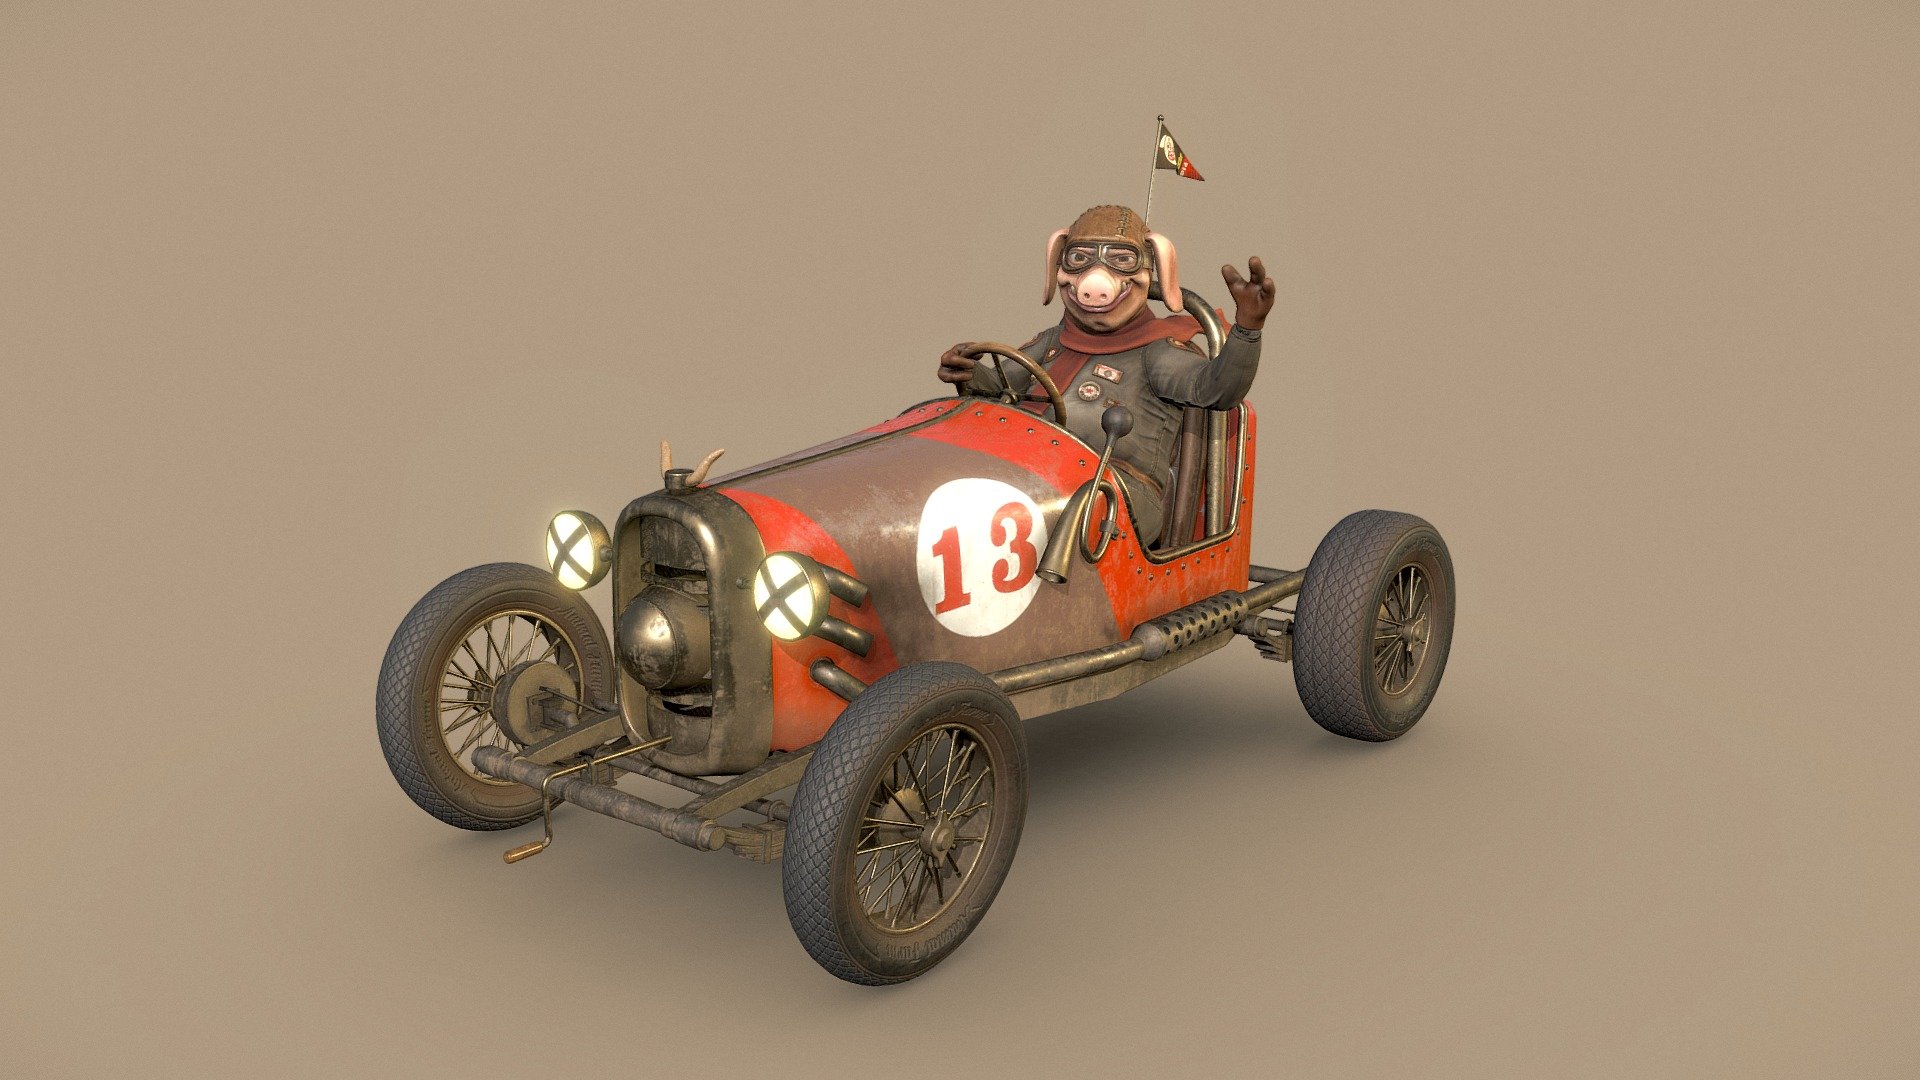 Give me 4 wheels and some gas and I will beat anyone leaving them choking with the trail dust of my car. Fantasy racing pig car made with 115918 quads, centered with PBR textures in 4096 x 4096 3d model